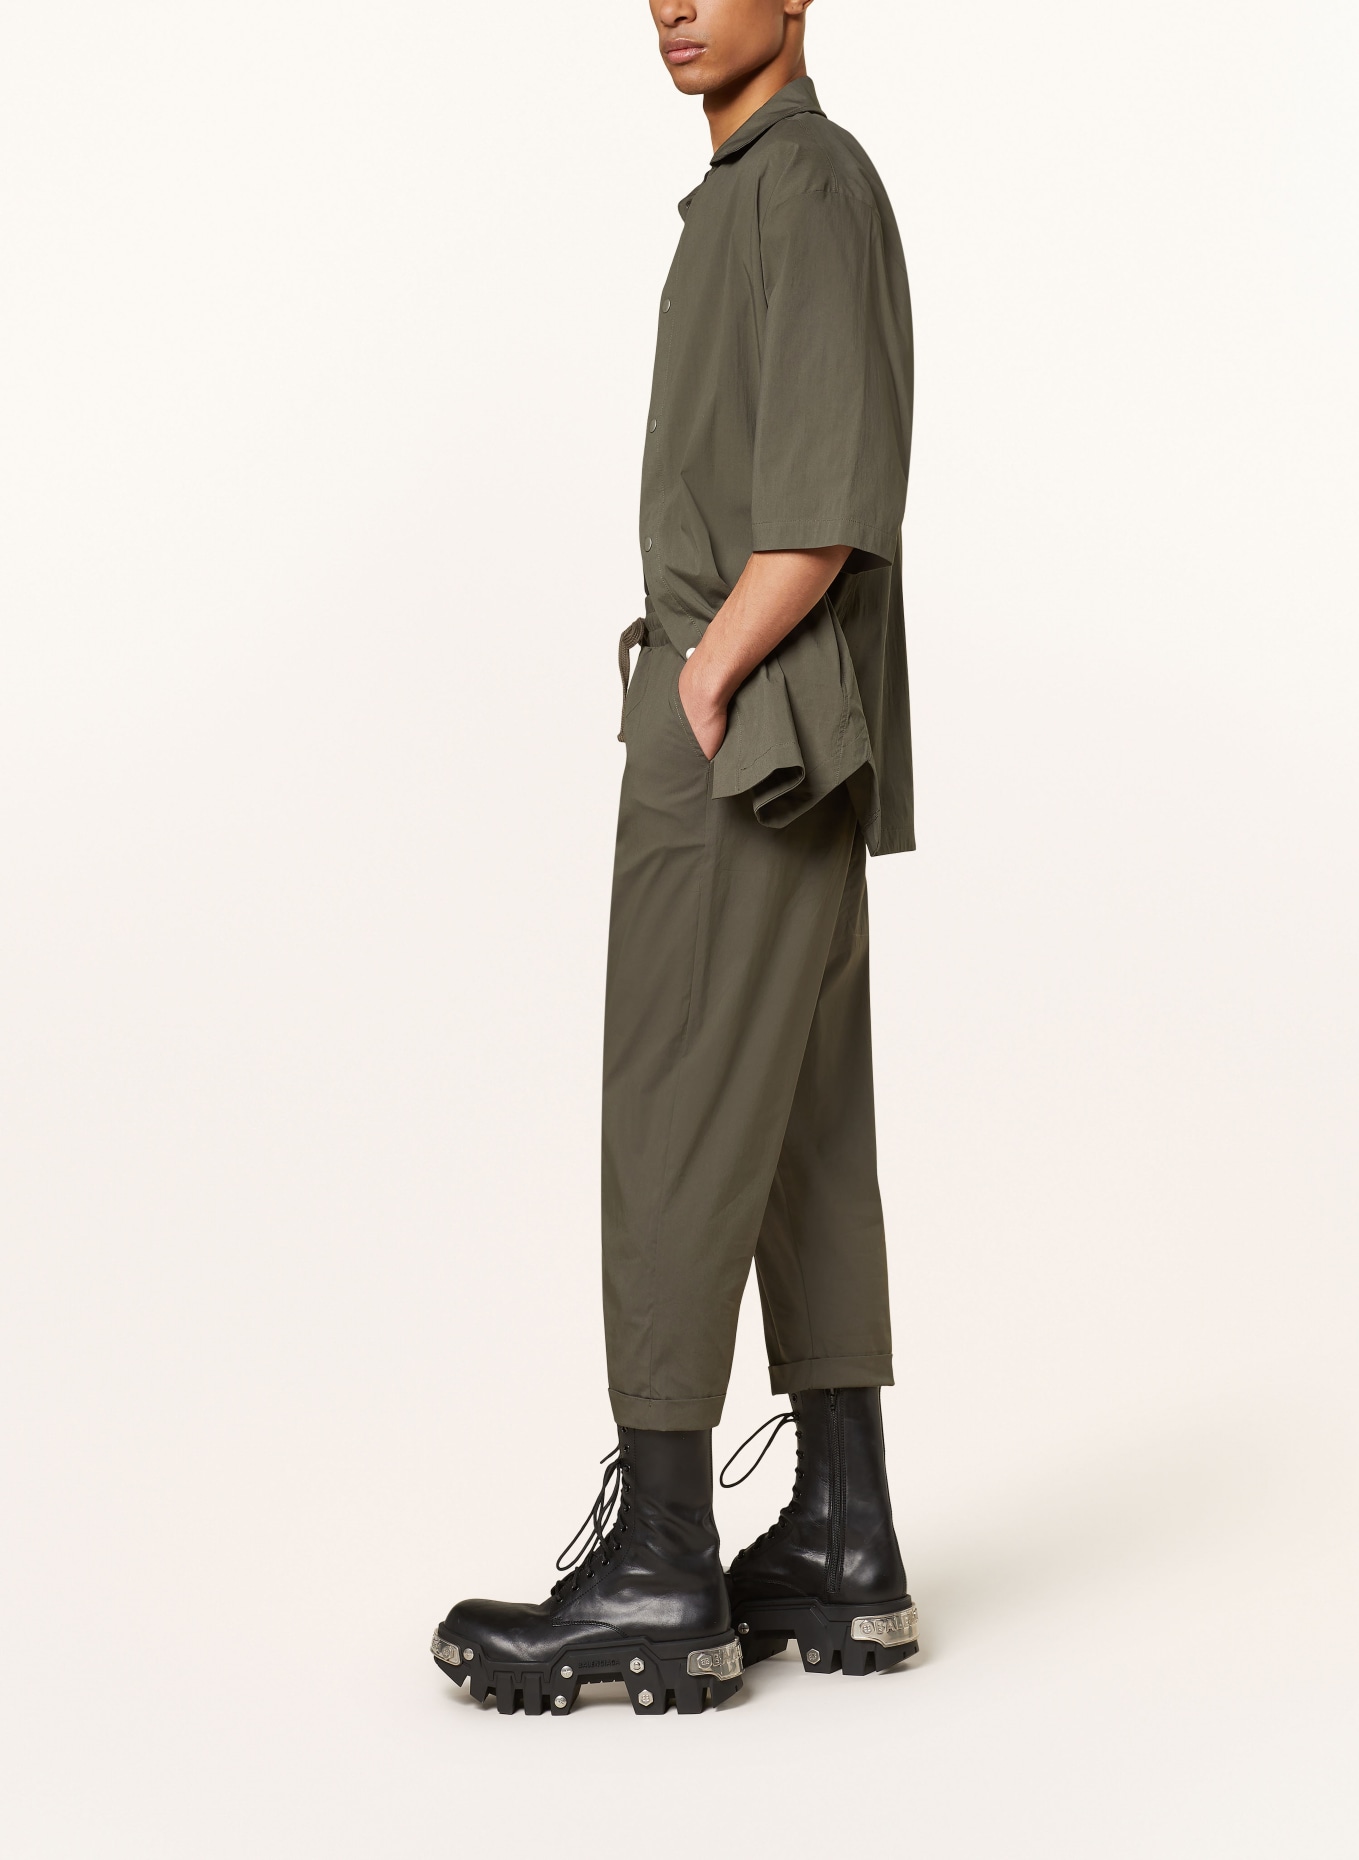 thom/krom Pants in jogger style slim fit, Color: KHAKI (Image 4)